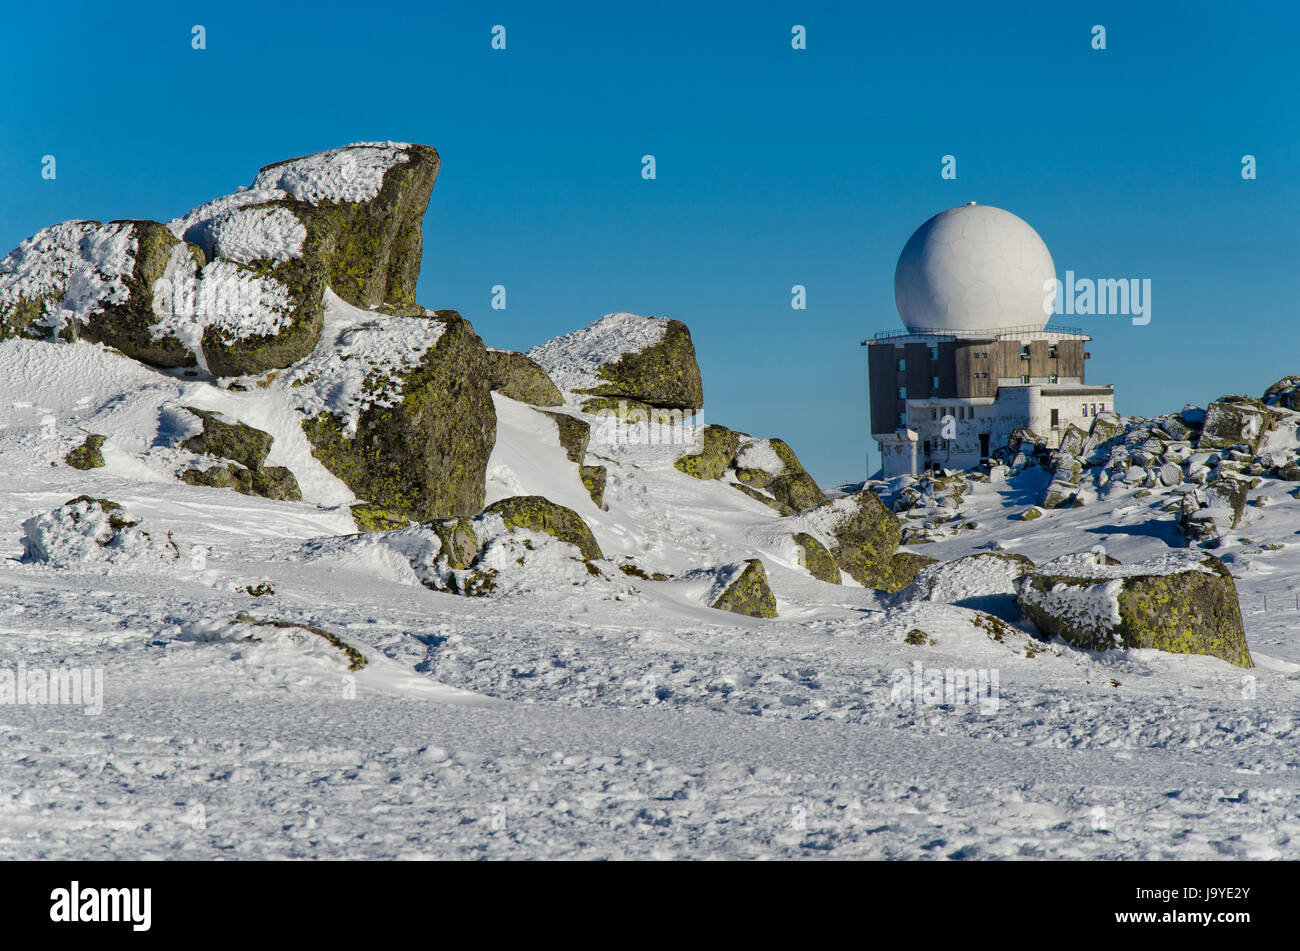 Old observatory in the mountain against deep blue sky and rocks, covered with snow Stock Photo